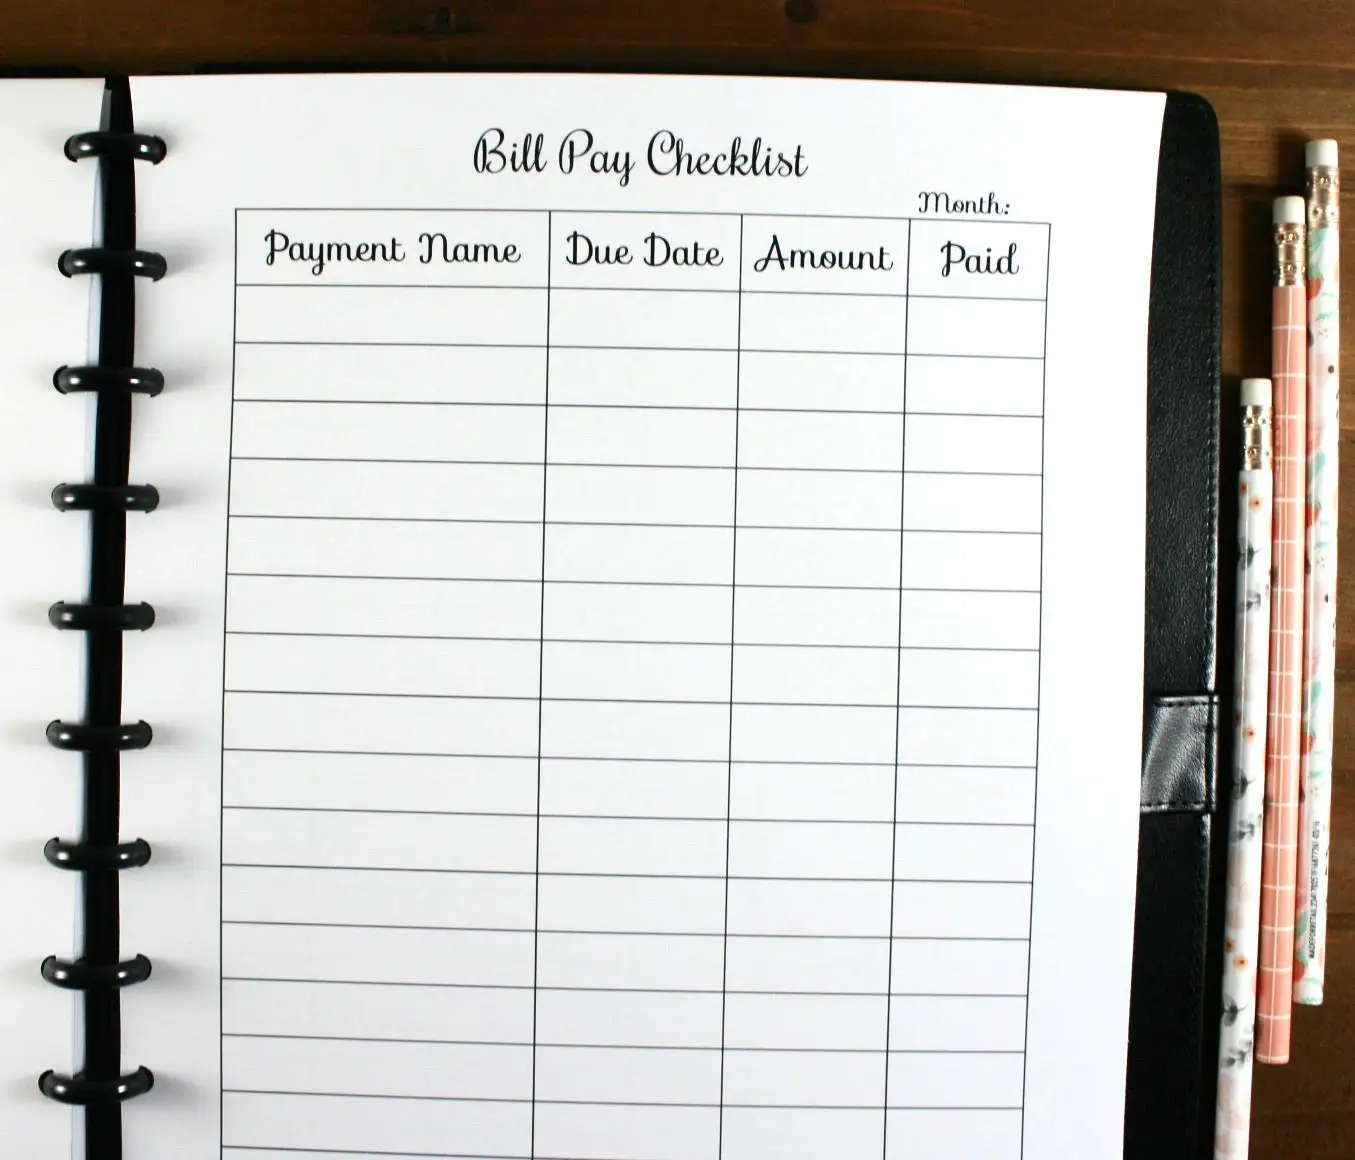 buy-bill-pay-checklist-for-discbound-planners-fits-with-circa-letter